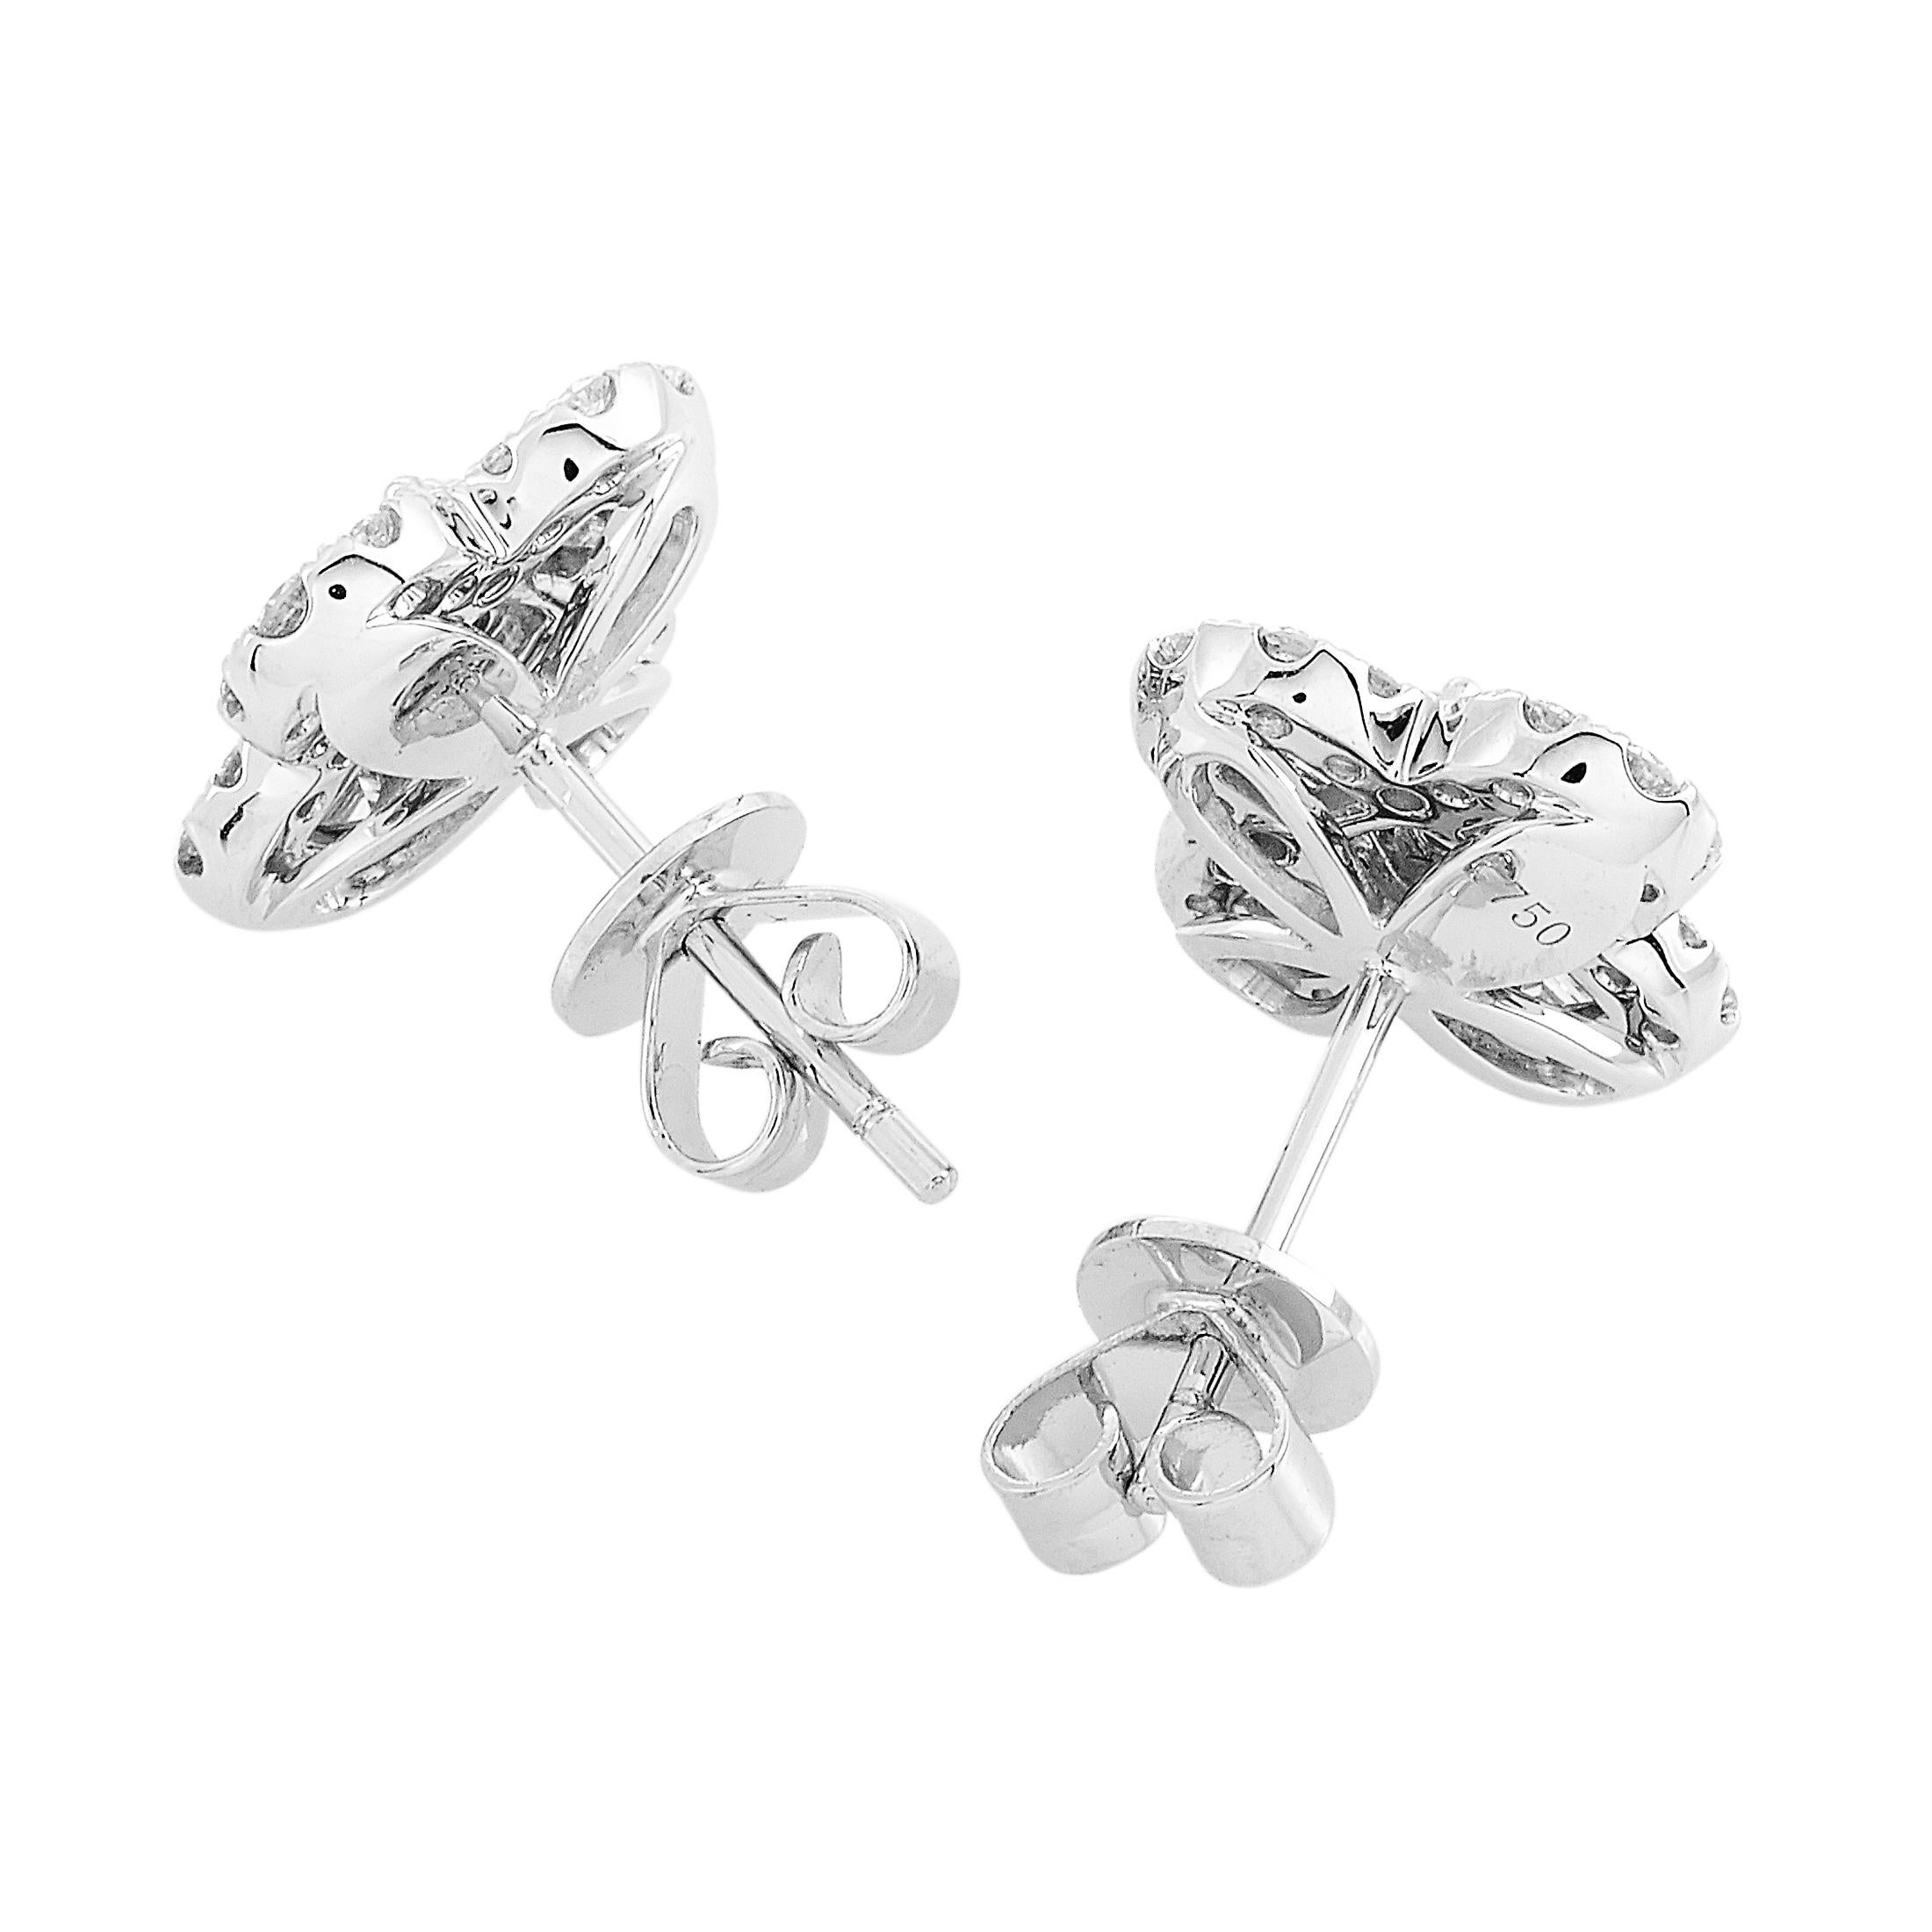 These LB Exclusive earrings are made of 18K white gold and each weighs 2.3 grams, measuring 0.55” in length and 0.55” in width. The earrings are embellished with round and asscher diamonds that total 0.58 and 0.96 carats respectively.

The pair is